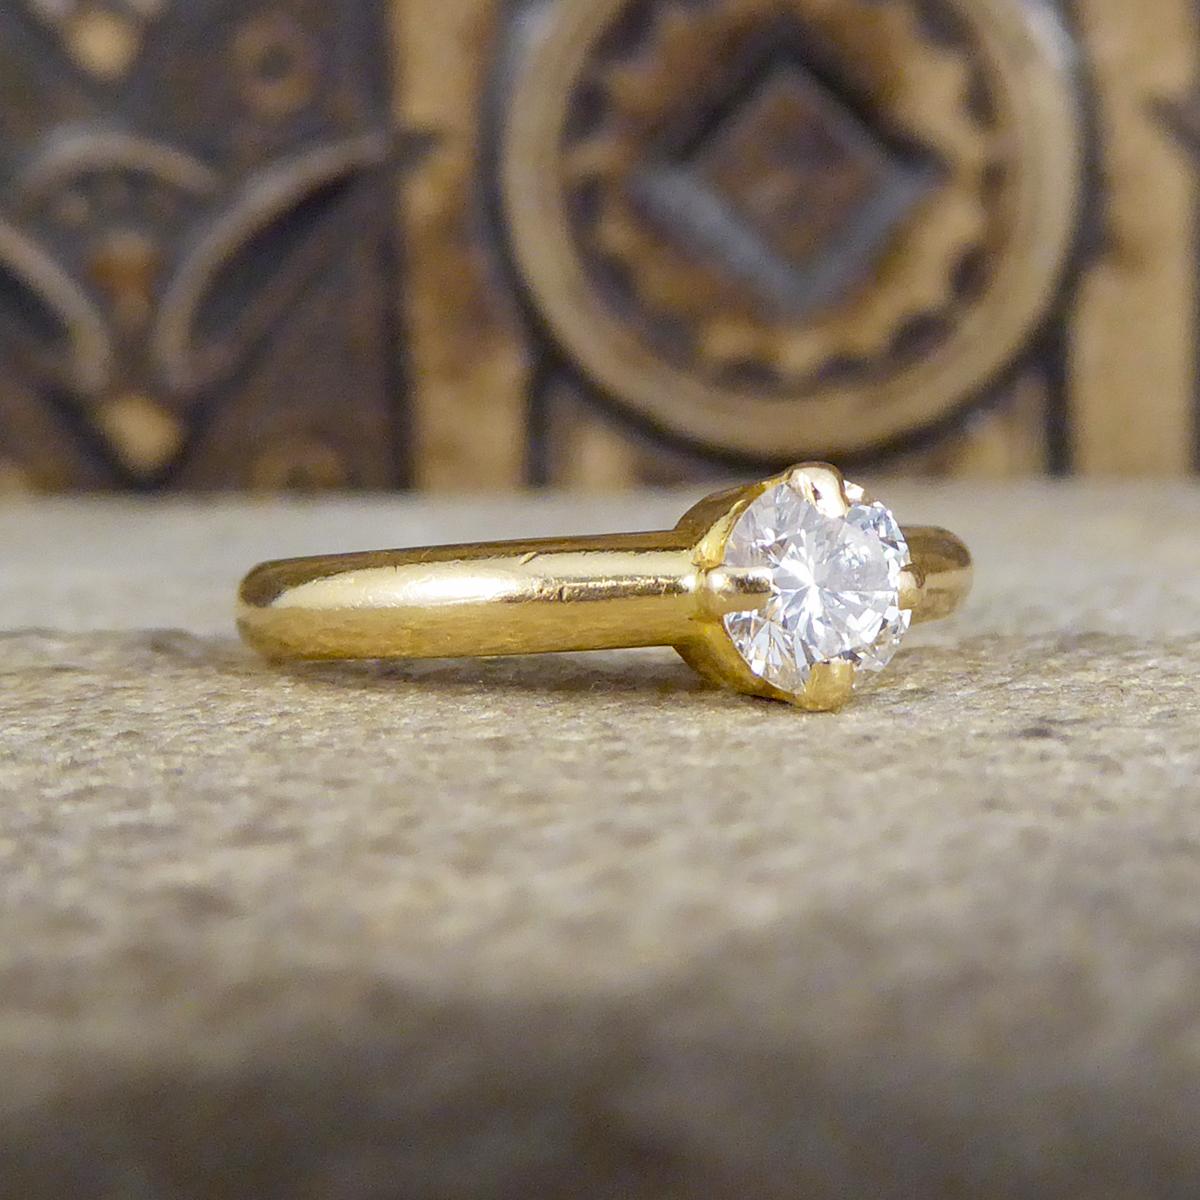 This ring features a round brilliant cut Diamond weighing 0.45ct. It is set in a feature four claw set setting in 18ct Yellow Gold leading down to a 18ct Yellow Gold plain polished band. This beautiful ring would make the perfect classic engagement